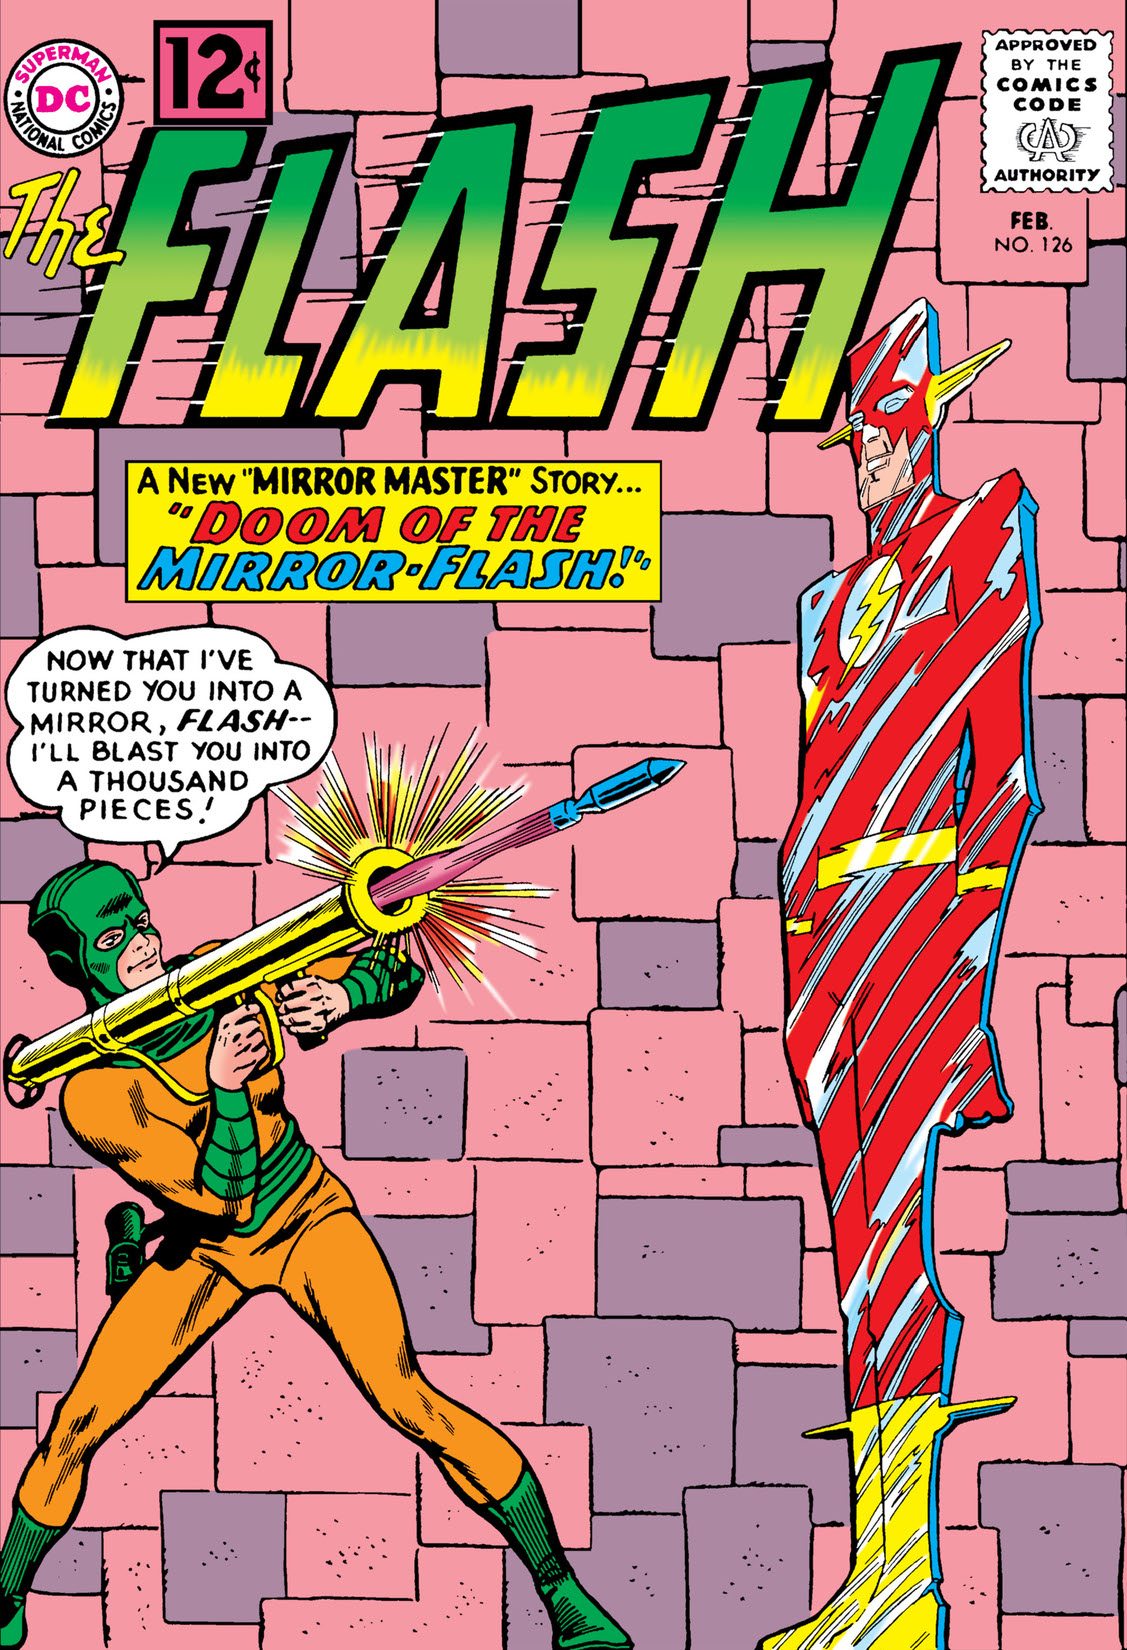 The Flash (1959-) #126 preview images